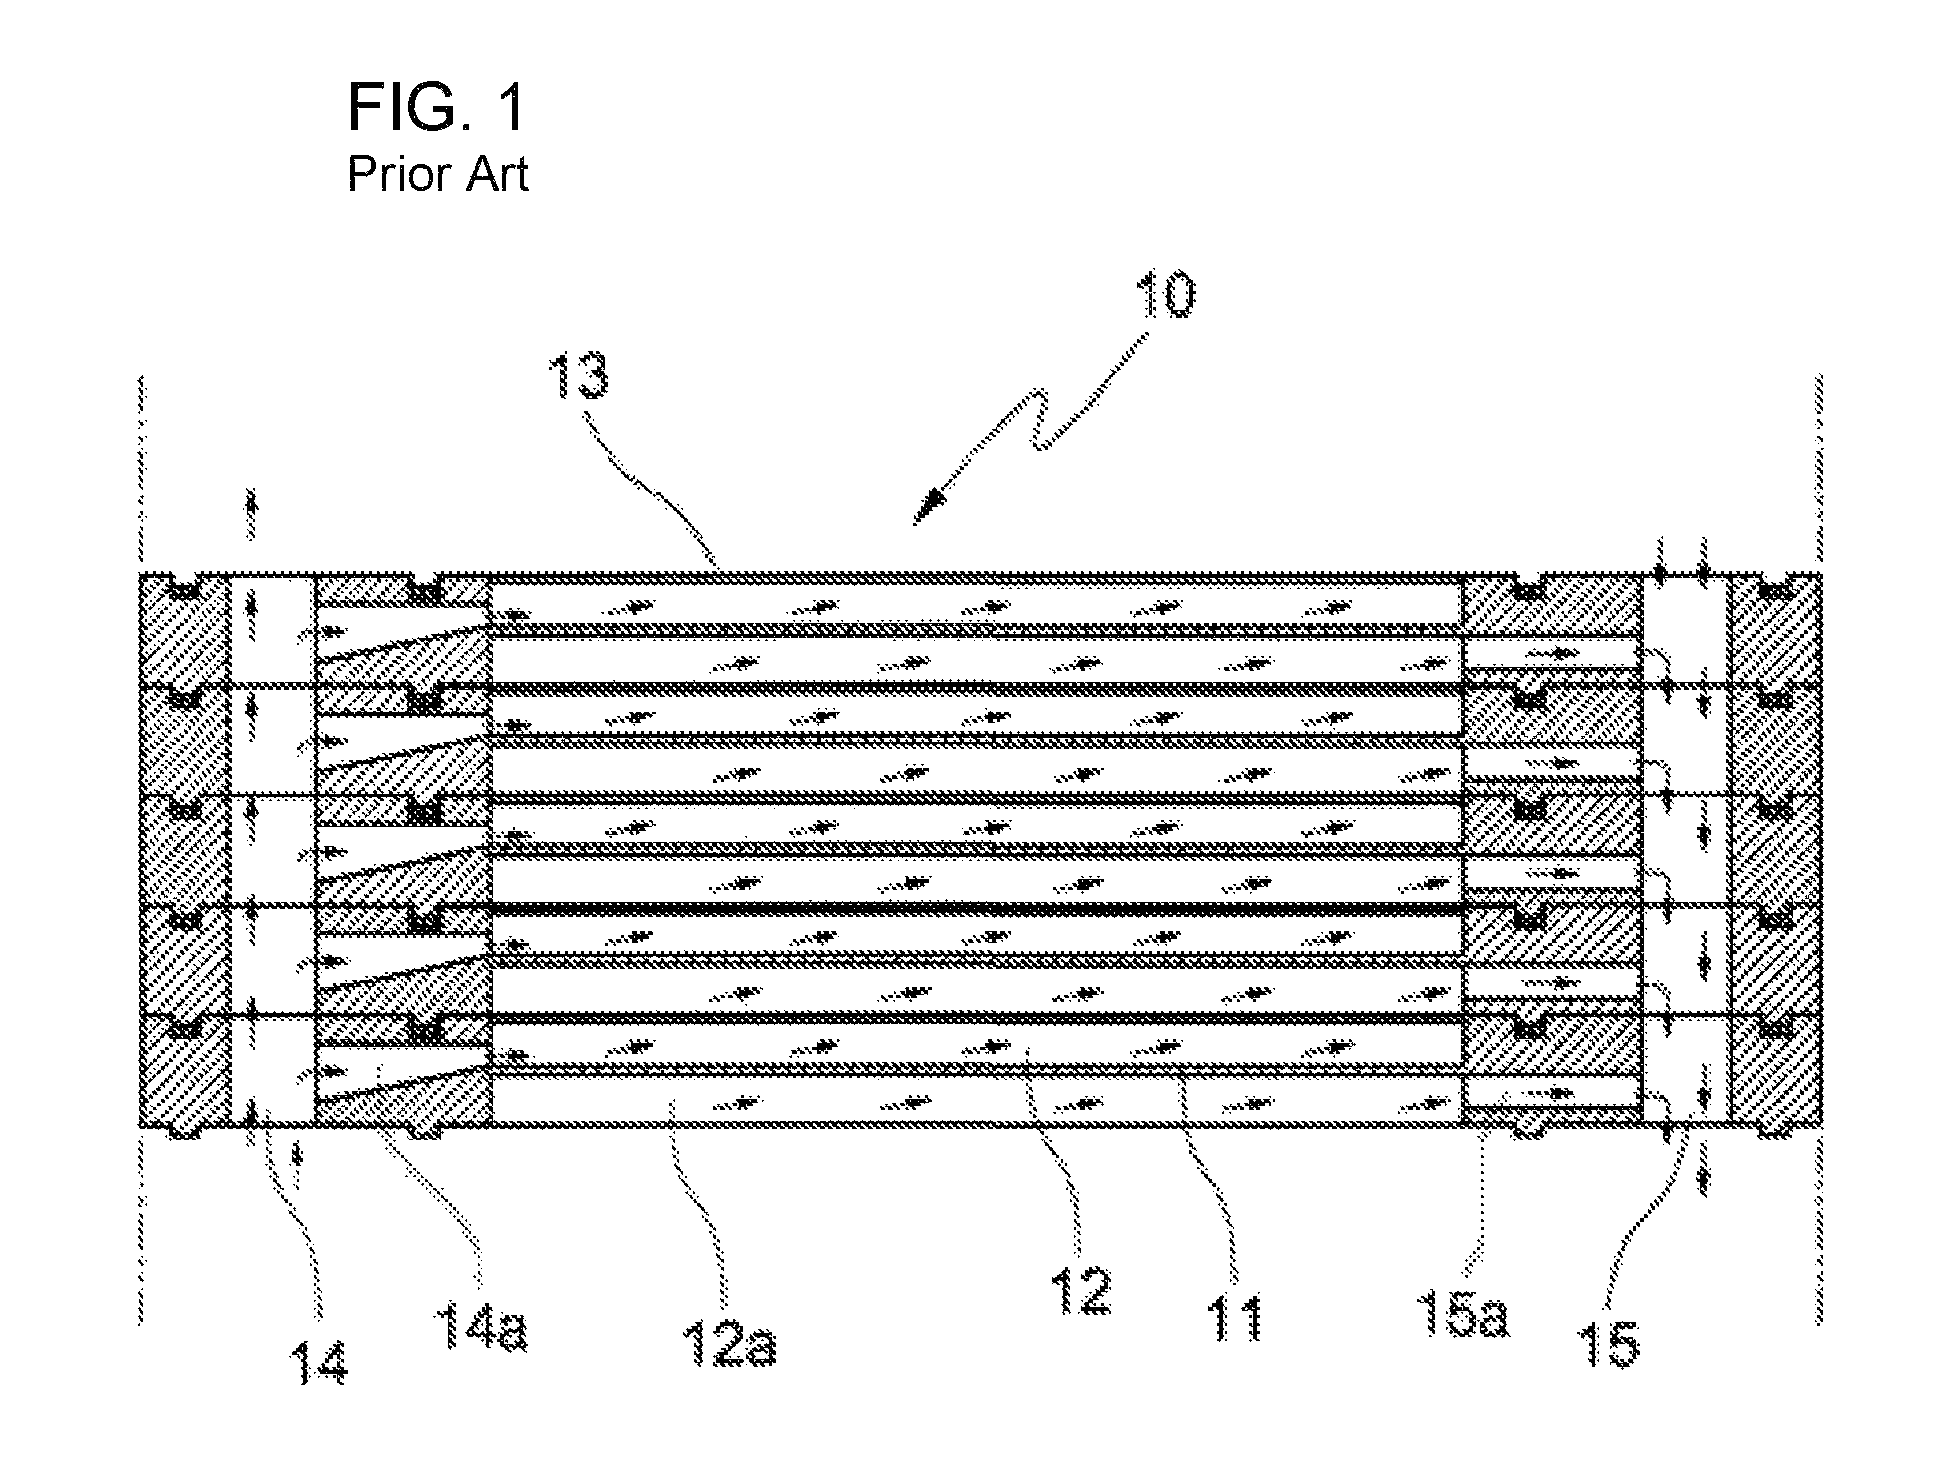 Circular filtering disc and filter device having the same